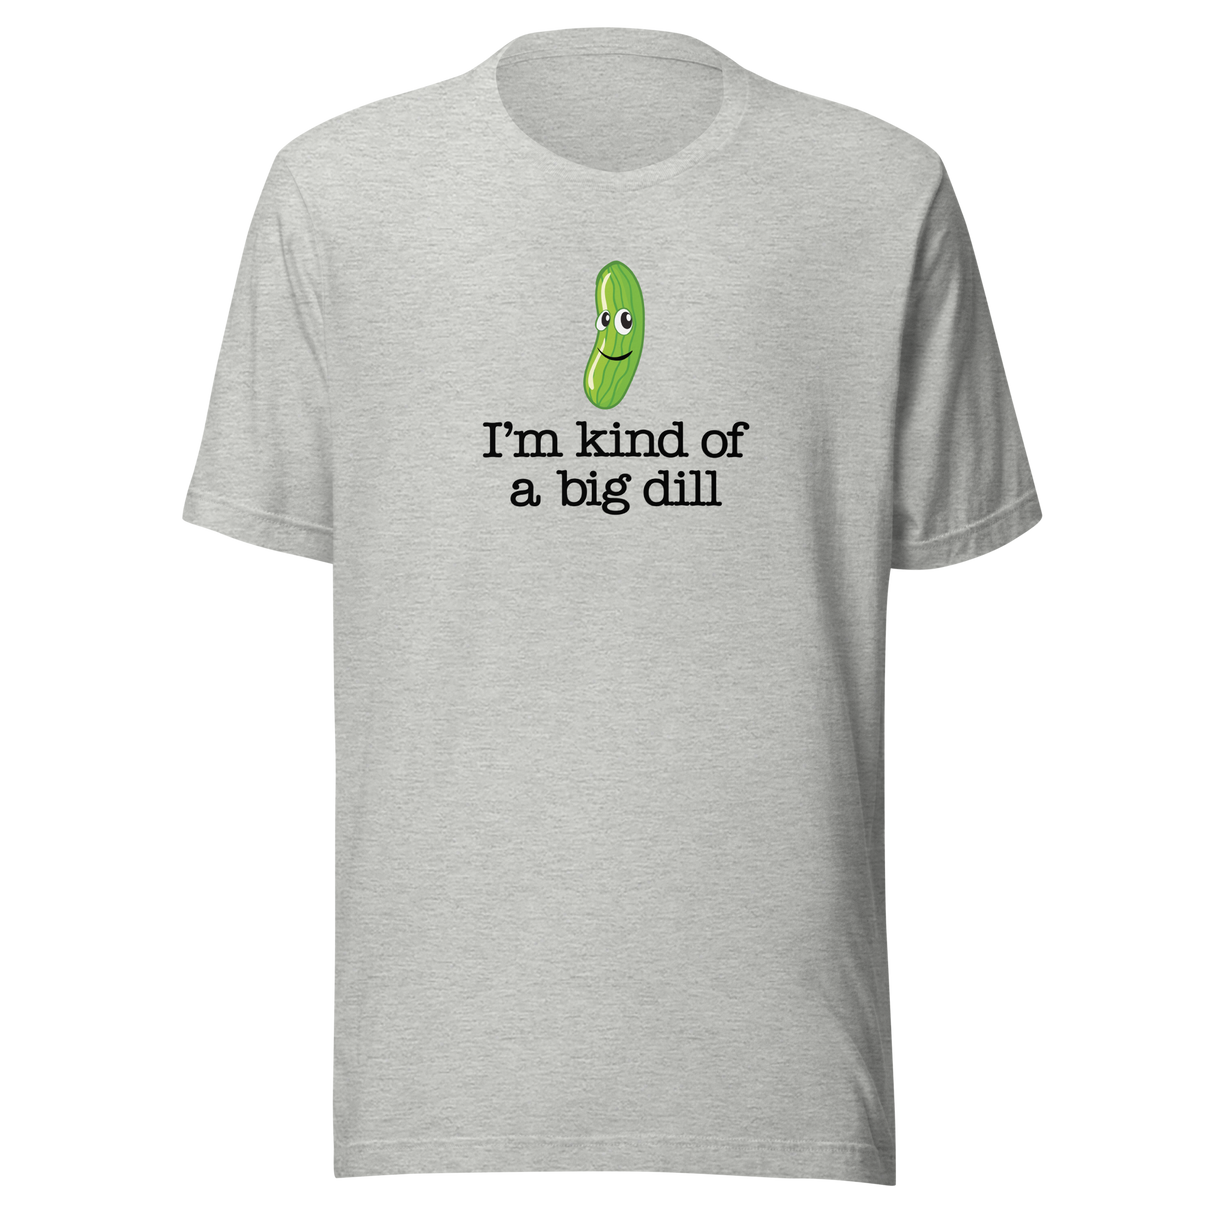 im-kind-of-a-big-dill-food-tee-life-t-shirt-punny-tee-clever-t-shirt-humorous-tee#color_athletic-heather